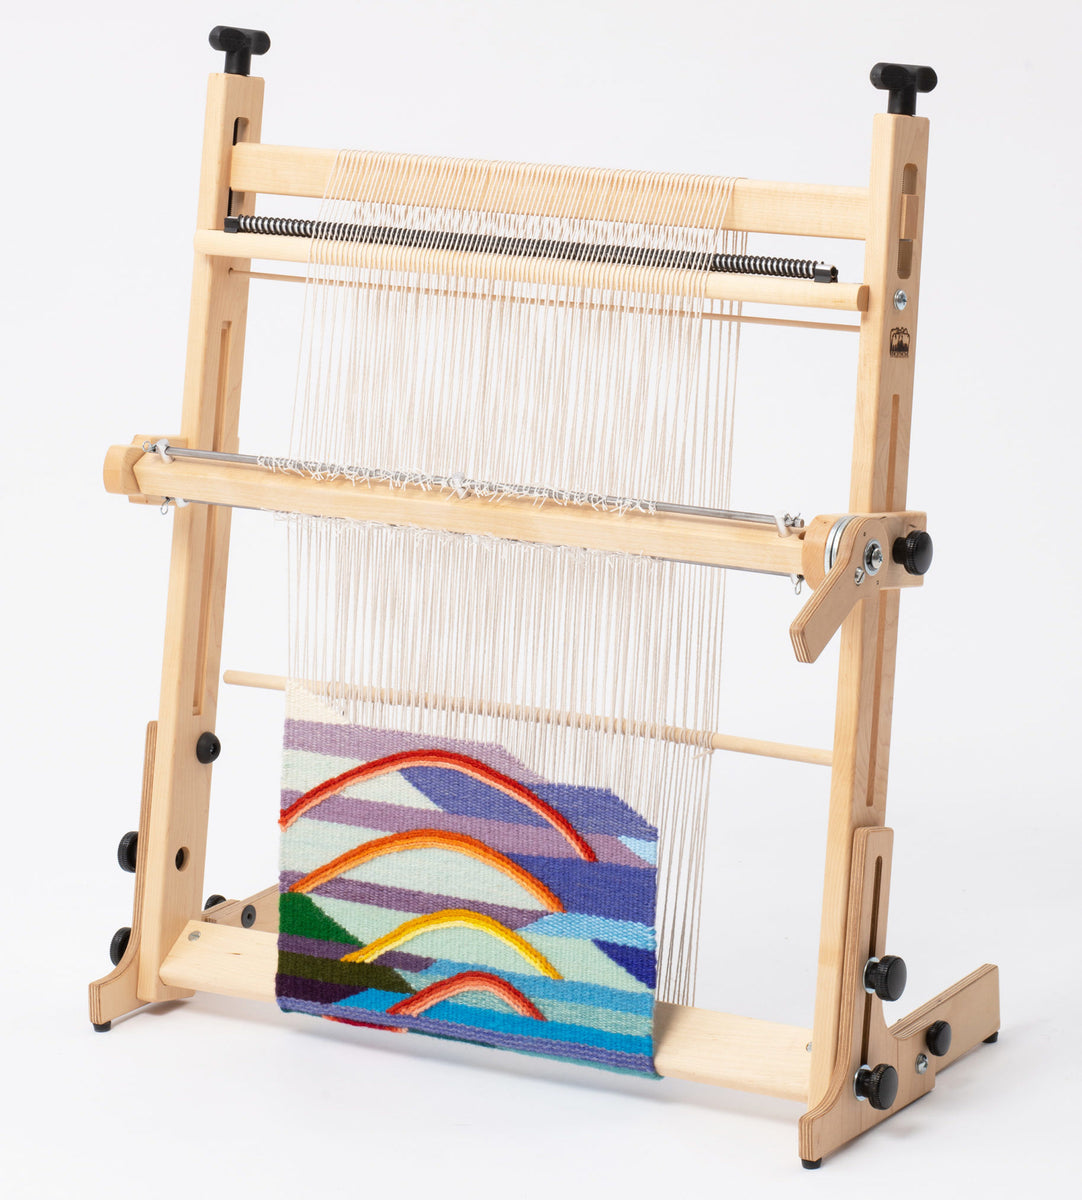 This Portable Loom Lets You Weave on The Go - Make